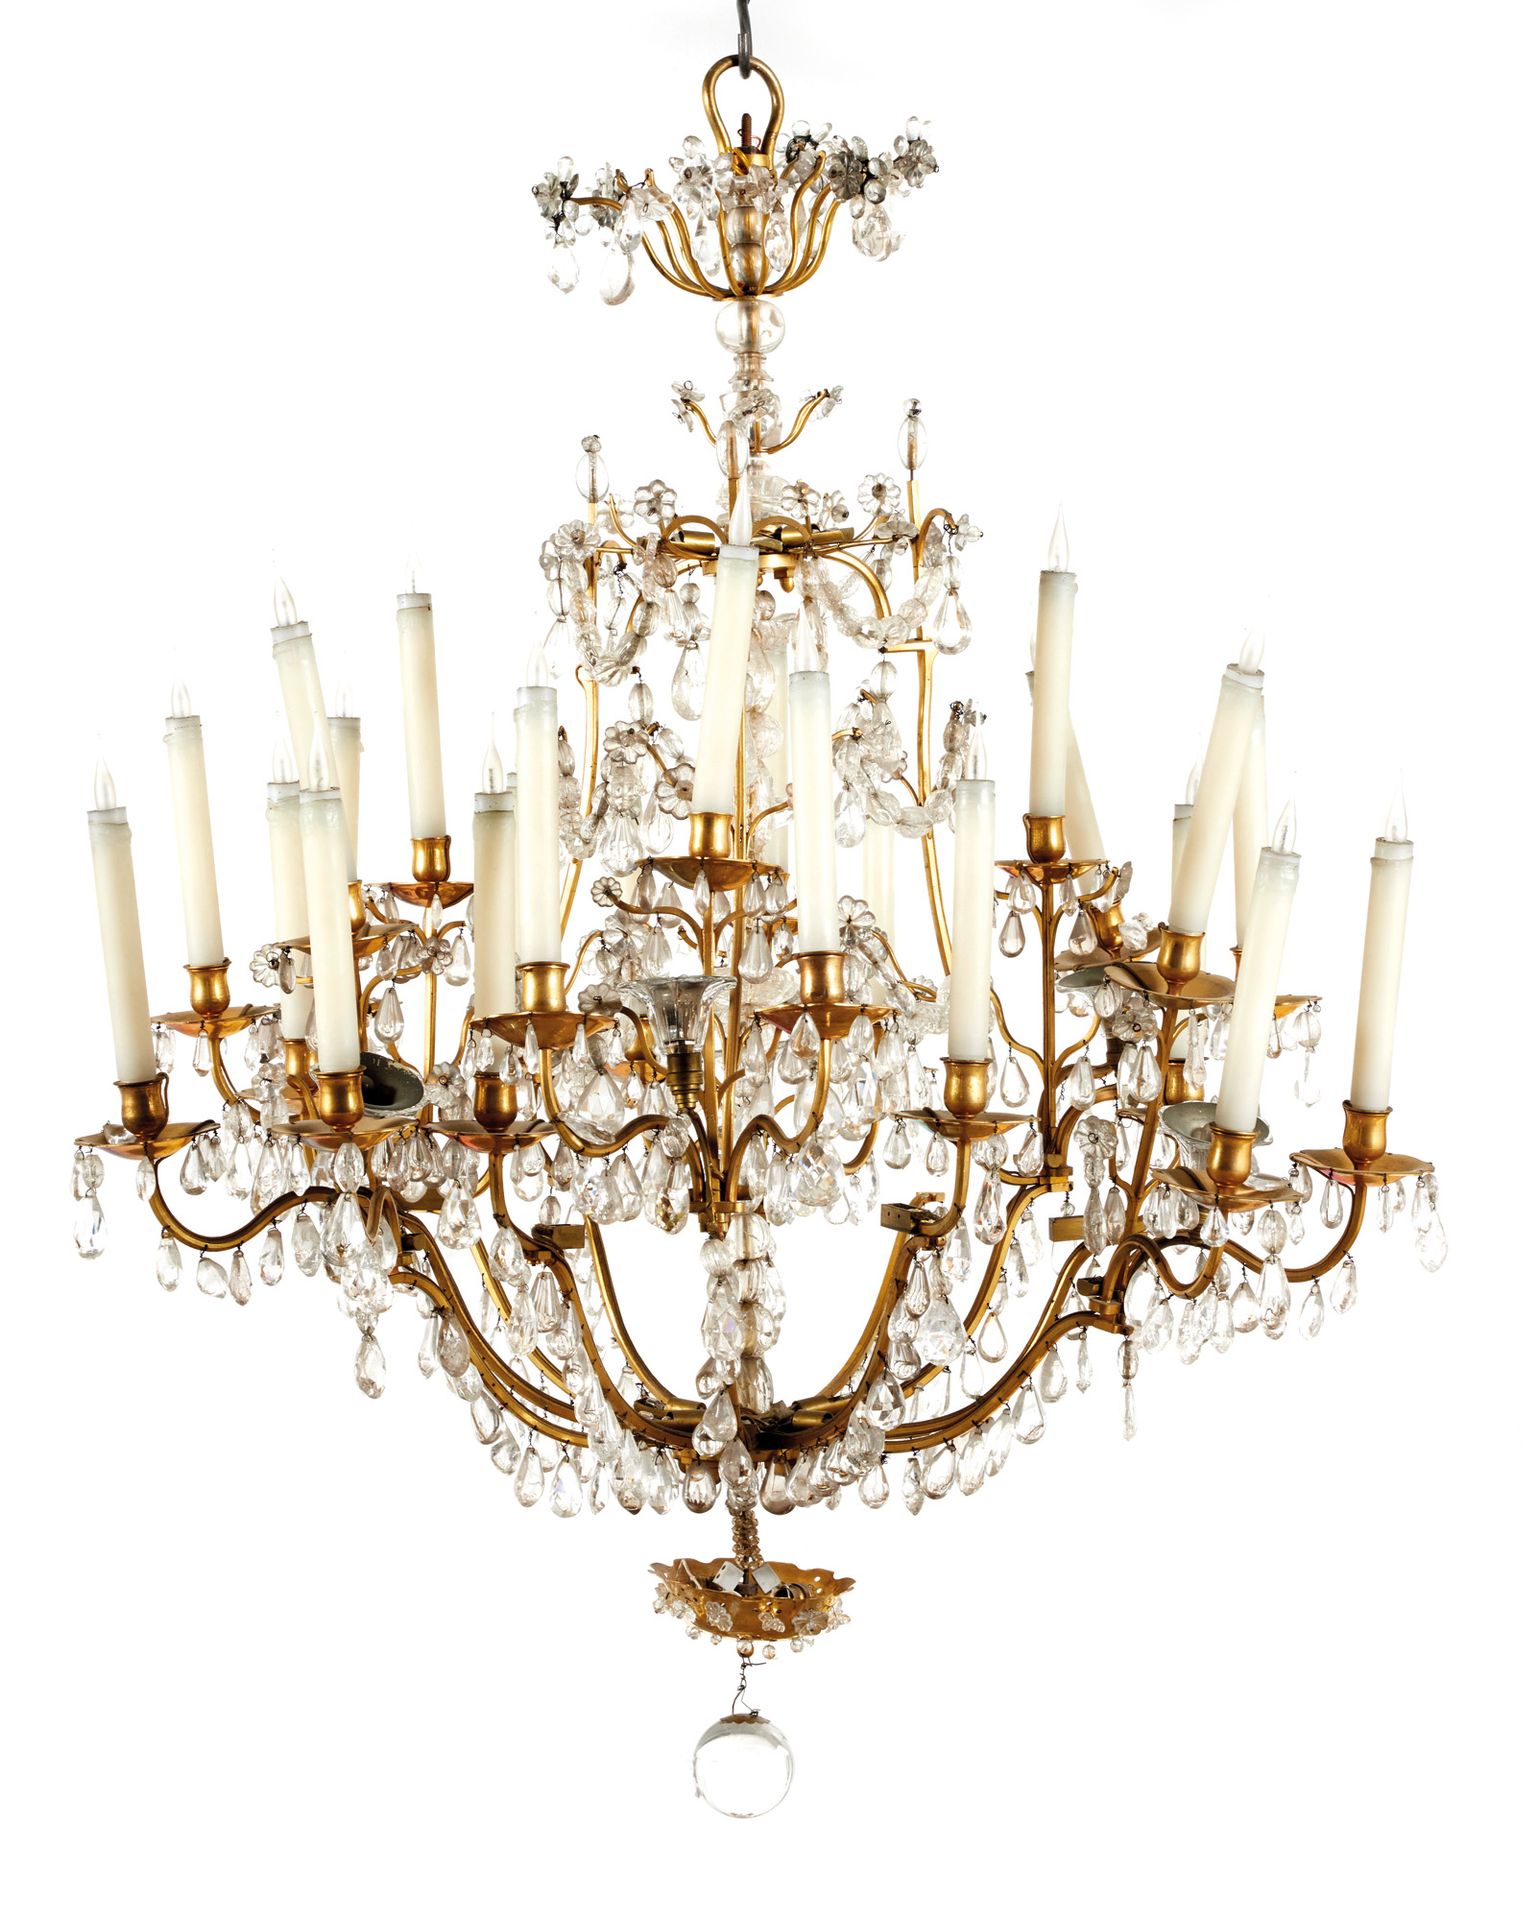 Lustre Chandelier
with twenty-four branches of light in chased bronze, decorated&hellip;